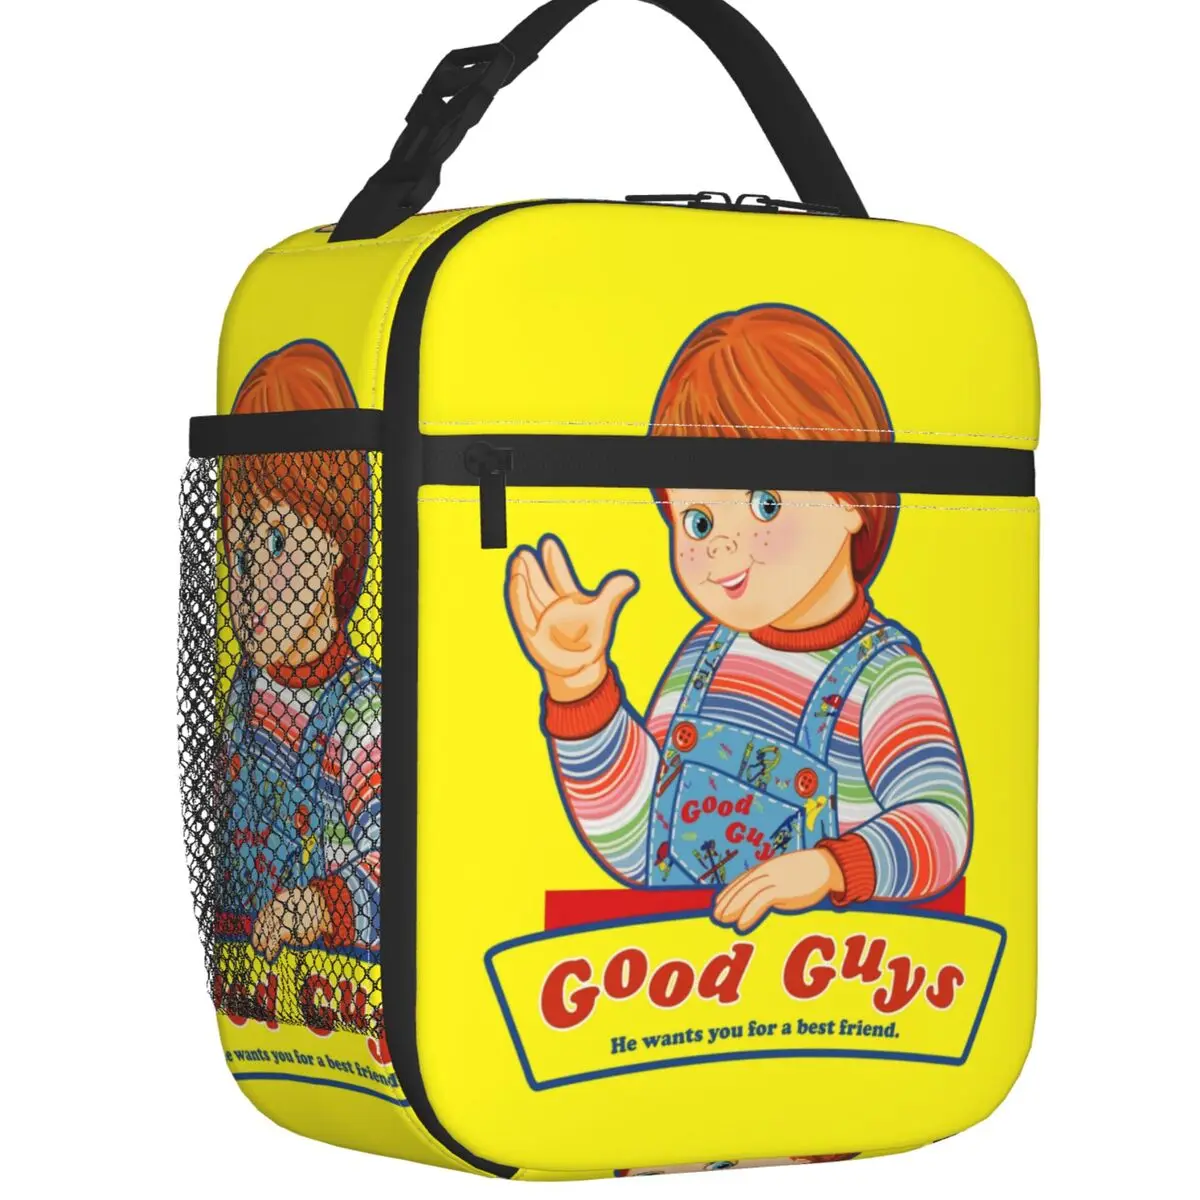 

Child's Play Good Guys Insulated Lunch Bags for Women Chucky Portable Thermal Cooler Bento Box School